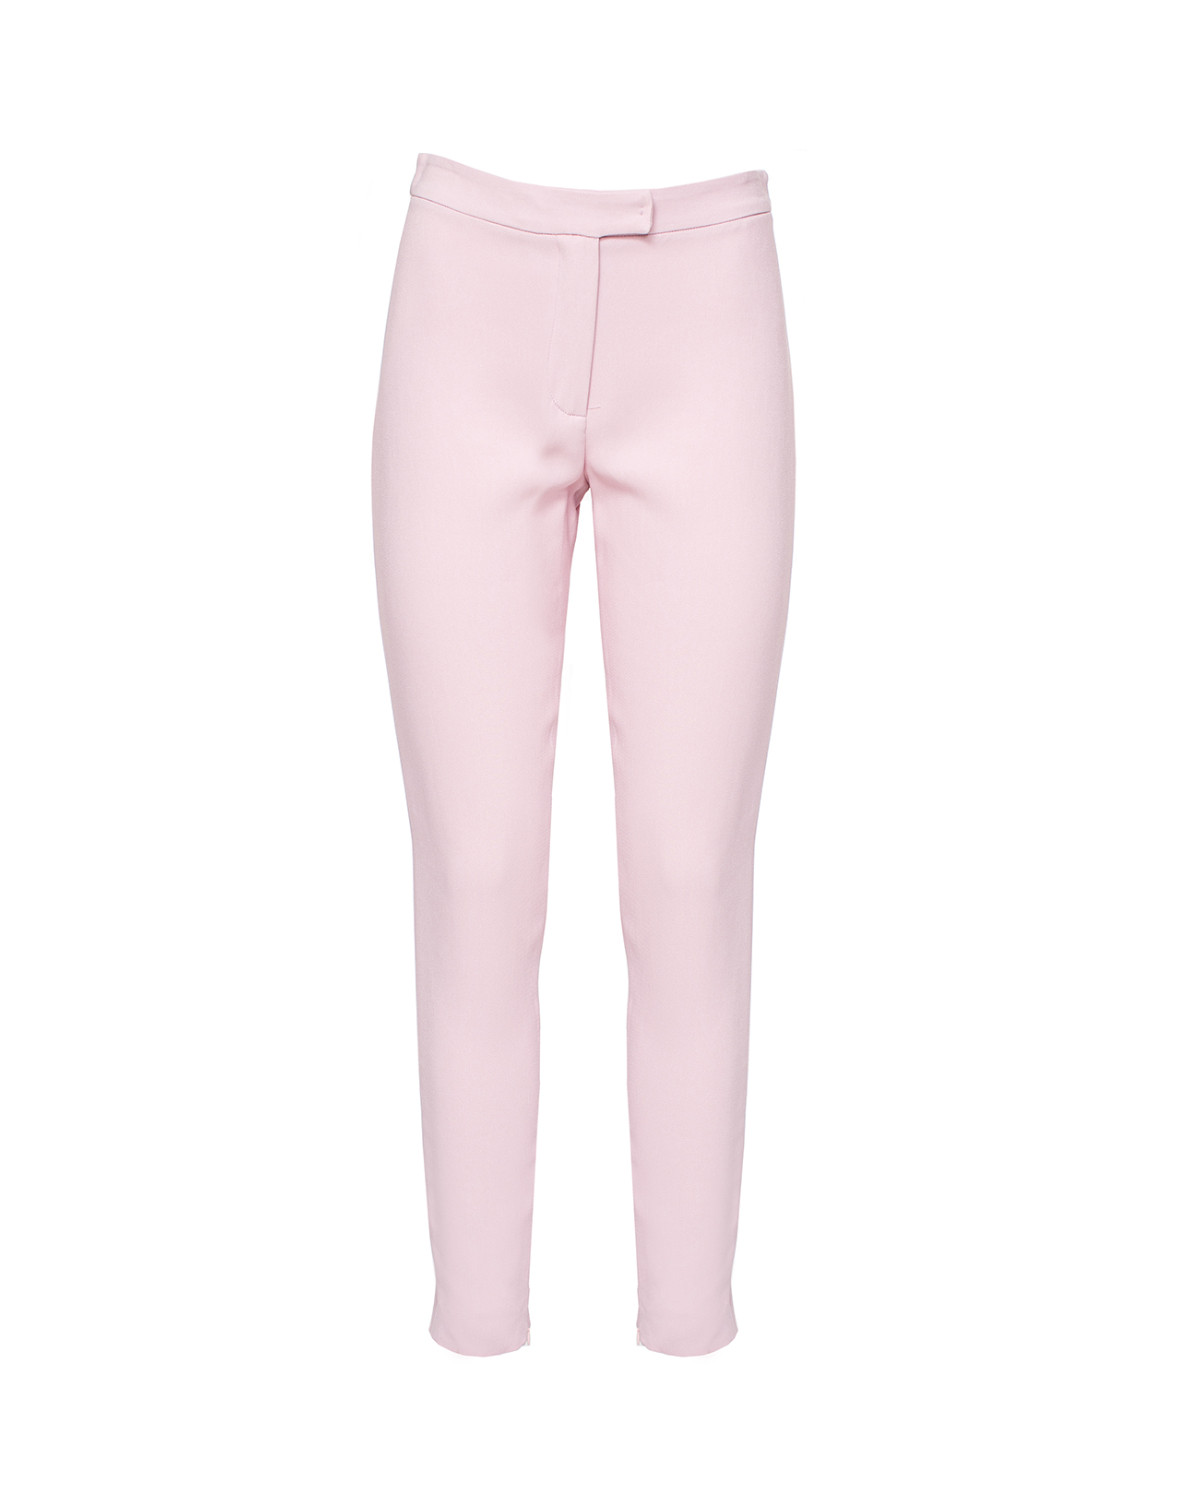 High-rise pants with zip on the bottom